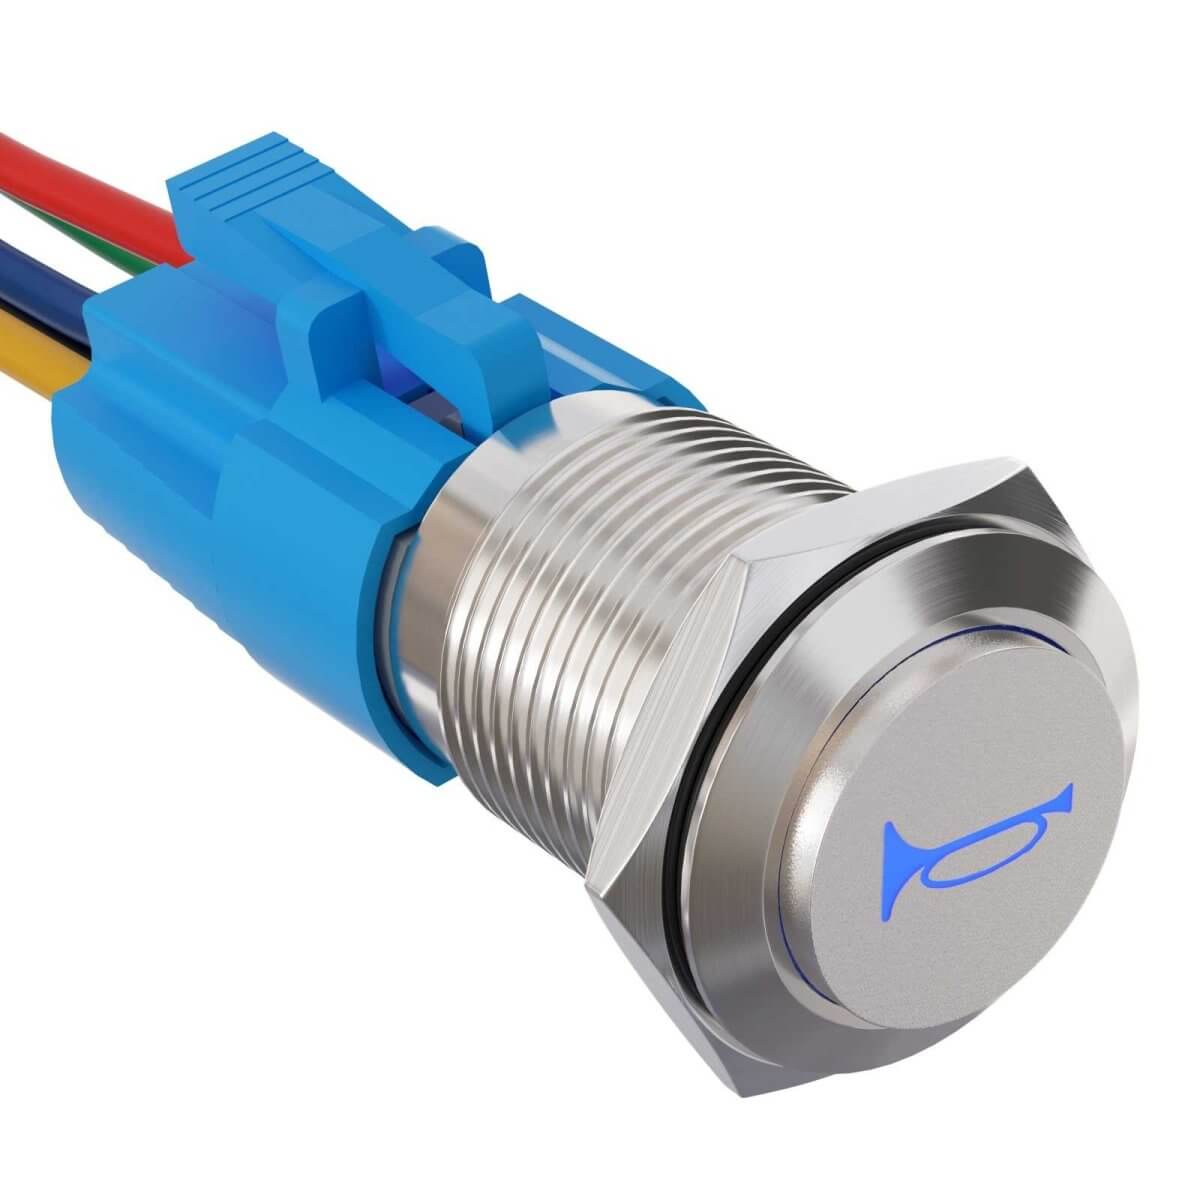 19mm 12V Momentary Speaker Horn Push Button Toggle Switch 3/4 Mounting Hole 1NO 1NC SPDT with Pre-Wiring Socket for Car Auto Motor - Blue-Stainless steel